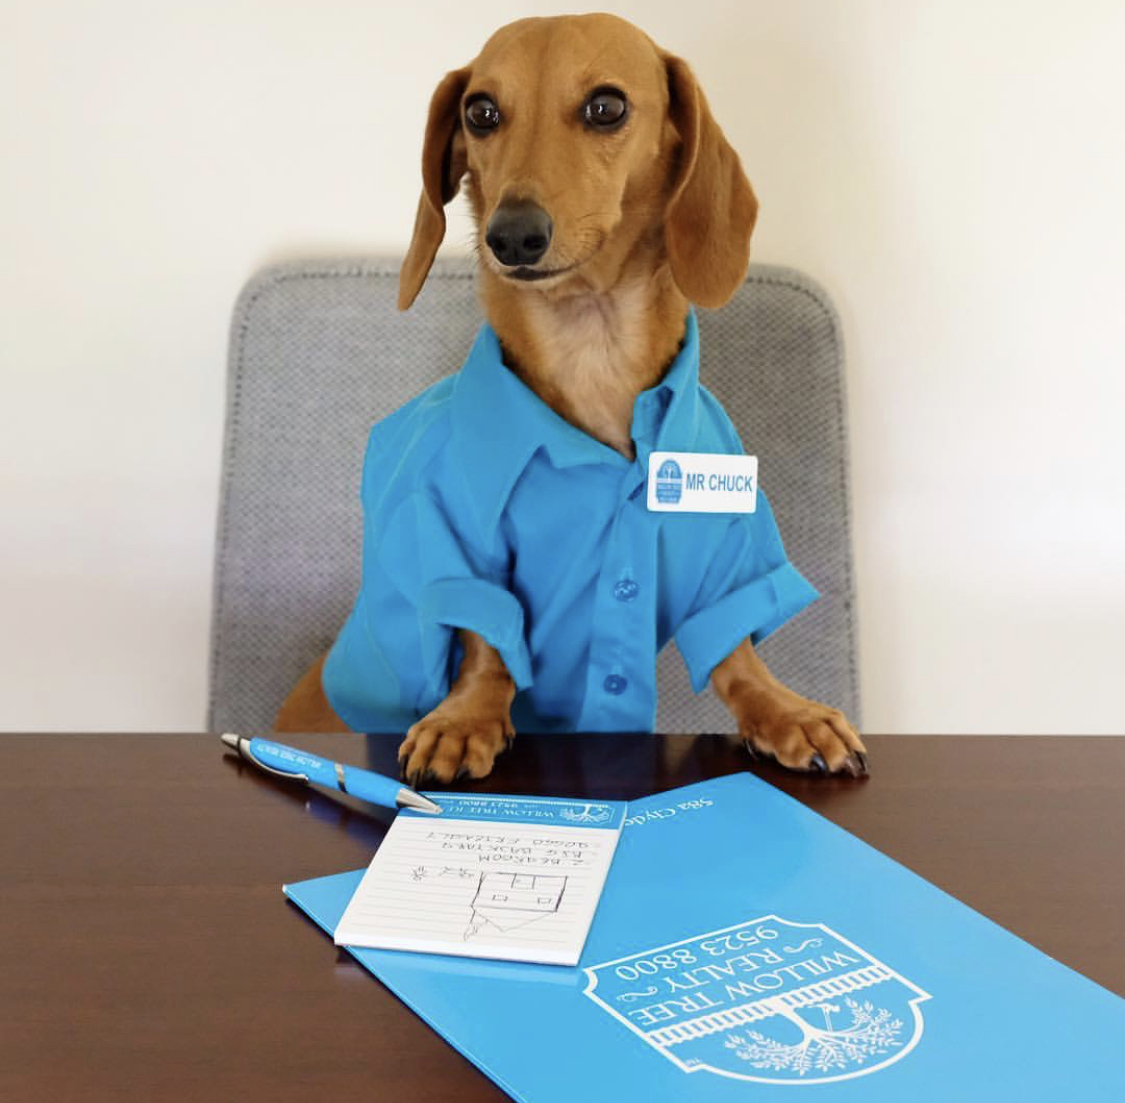 Dachshund wearing a blue polo with a name tag and flyers and ballpen on the table